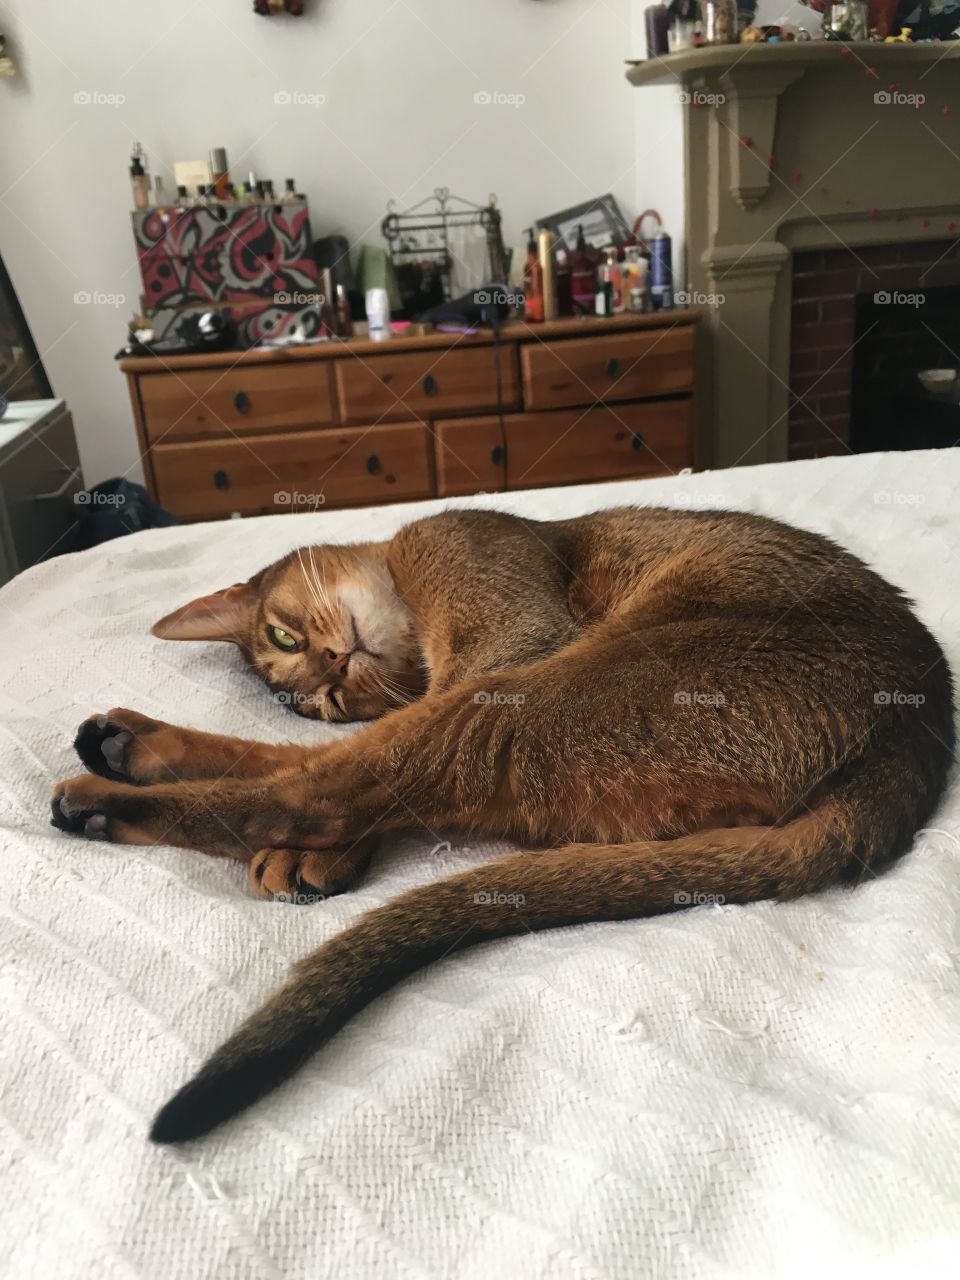 Abyssinian cat sleeping, March 2017